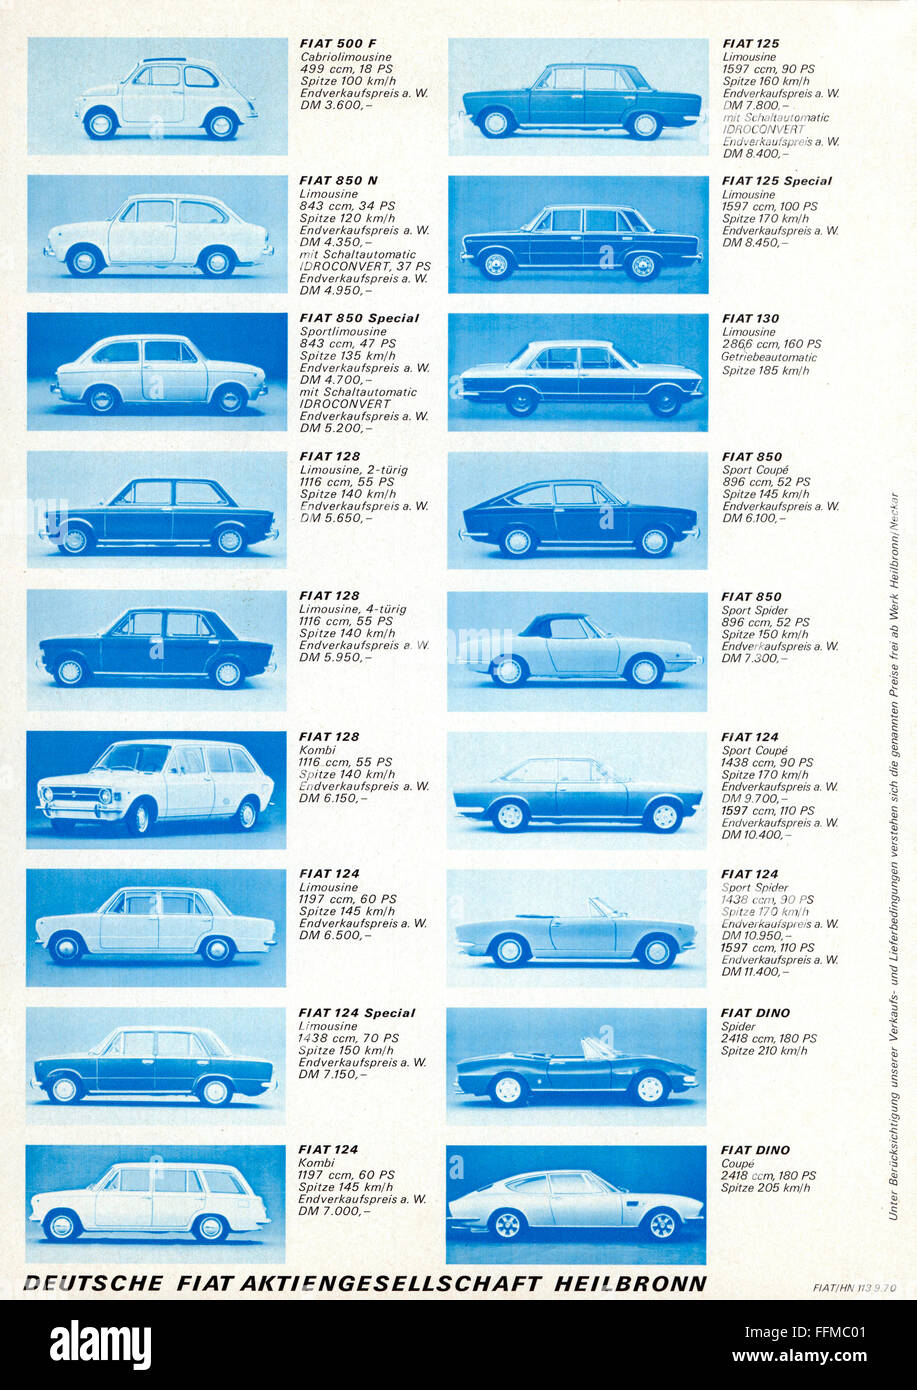 transport / transportation,car,vehicle variants,Fiat,advertising,leaflet of Fiat Germany,Heilbronn,September 1970,oversight on the array of products,versions,styles,models,500 F,850 N,850 Special,128 estate car,124,125,130,850,Dino,product,variety of products,array of products,offering,economy,industries,car industry,automobile industry,vehicle,vehicles,motor car,auto,automobile,motorcar,motorcars,autos,automobiles,passenger cars,passenger coach,passenger car,1970s,70s,20th century,no-people,transport,transportation,Additional-Rights-Clearences-Not Available Stock Photo